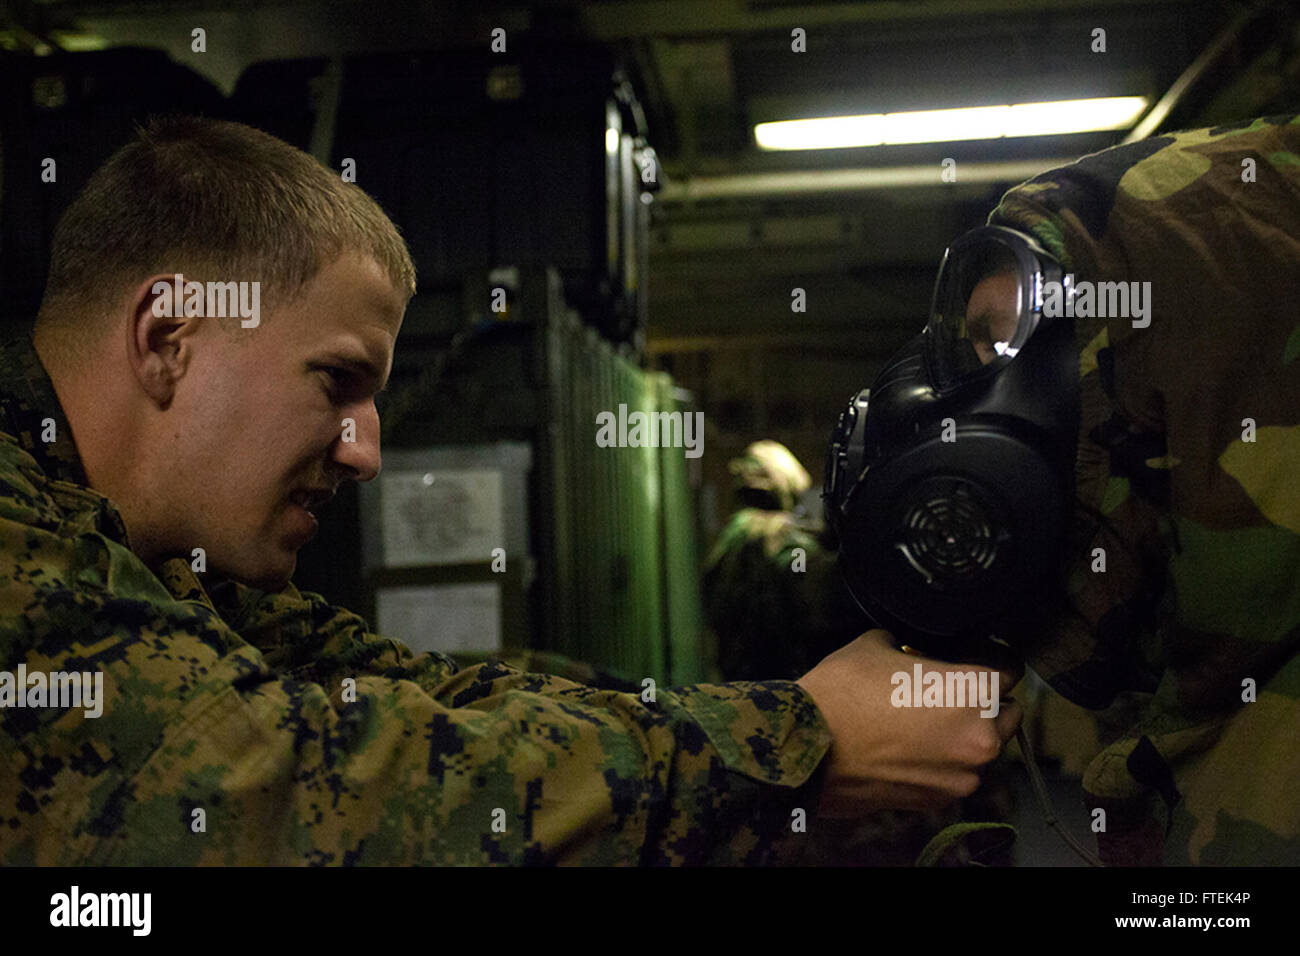 150108-M-QZ288-130 MEDITERRANEAN SEA (Jan. 8, 2015) Cpl. Evan A. Lafoose, a chemical, biological, radiological, and nuclear defense specialist with the 24th Marine Expeditionary Unit’s Command Element, adjusts a student’s M50 joint-service general-purpose gas mask during a mission-oriented protective posture gear refresher course aboard USS Iwo Jima (LHD 7) Jan. 8, 2015. The 24th MEU and Iwo Jima Amphibious Ready Group are conducting naval operations in the U.S. 6th Fleet area of operations in support of U.S. national security interests in Europe. (U.S. Marine Corps photo by Lance Cpl. Austin  Stock Photo